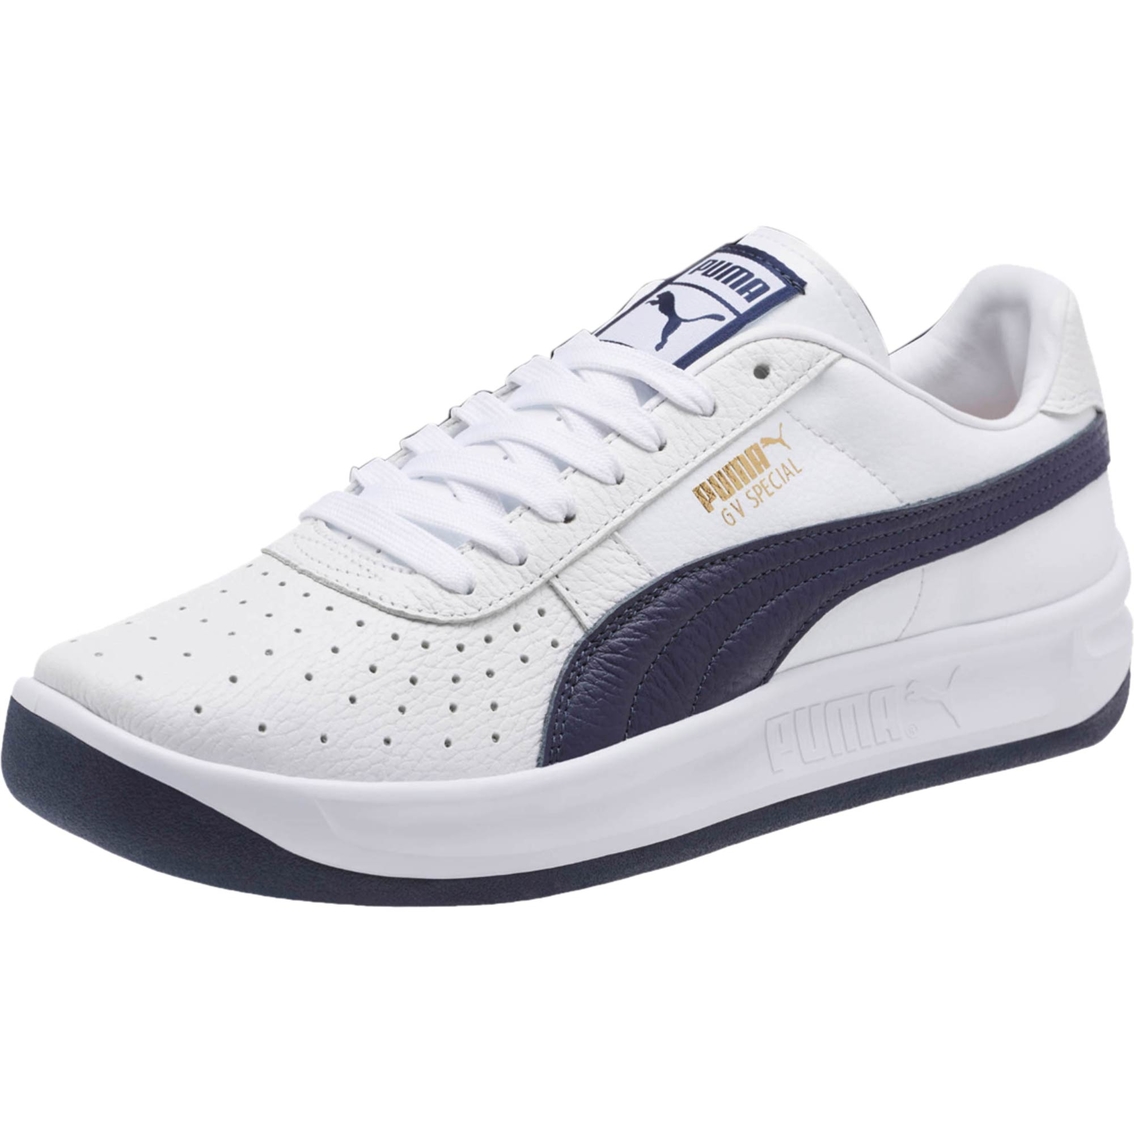 Puma Mens Gv Special+ | Sneakers | Back To School Shop | Shop The Exchange